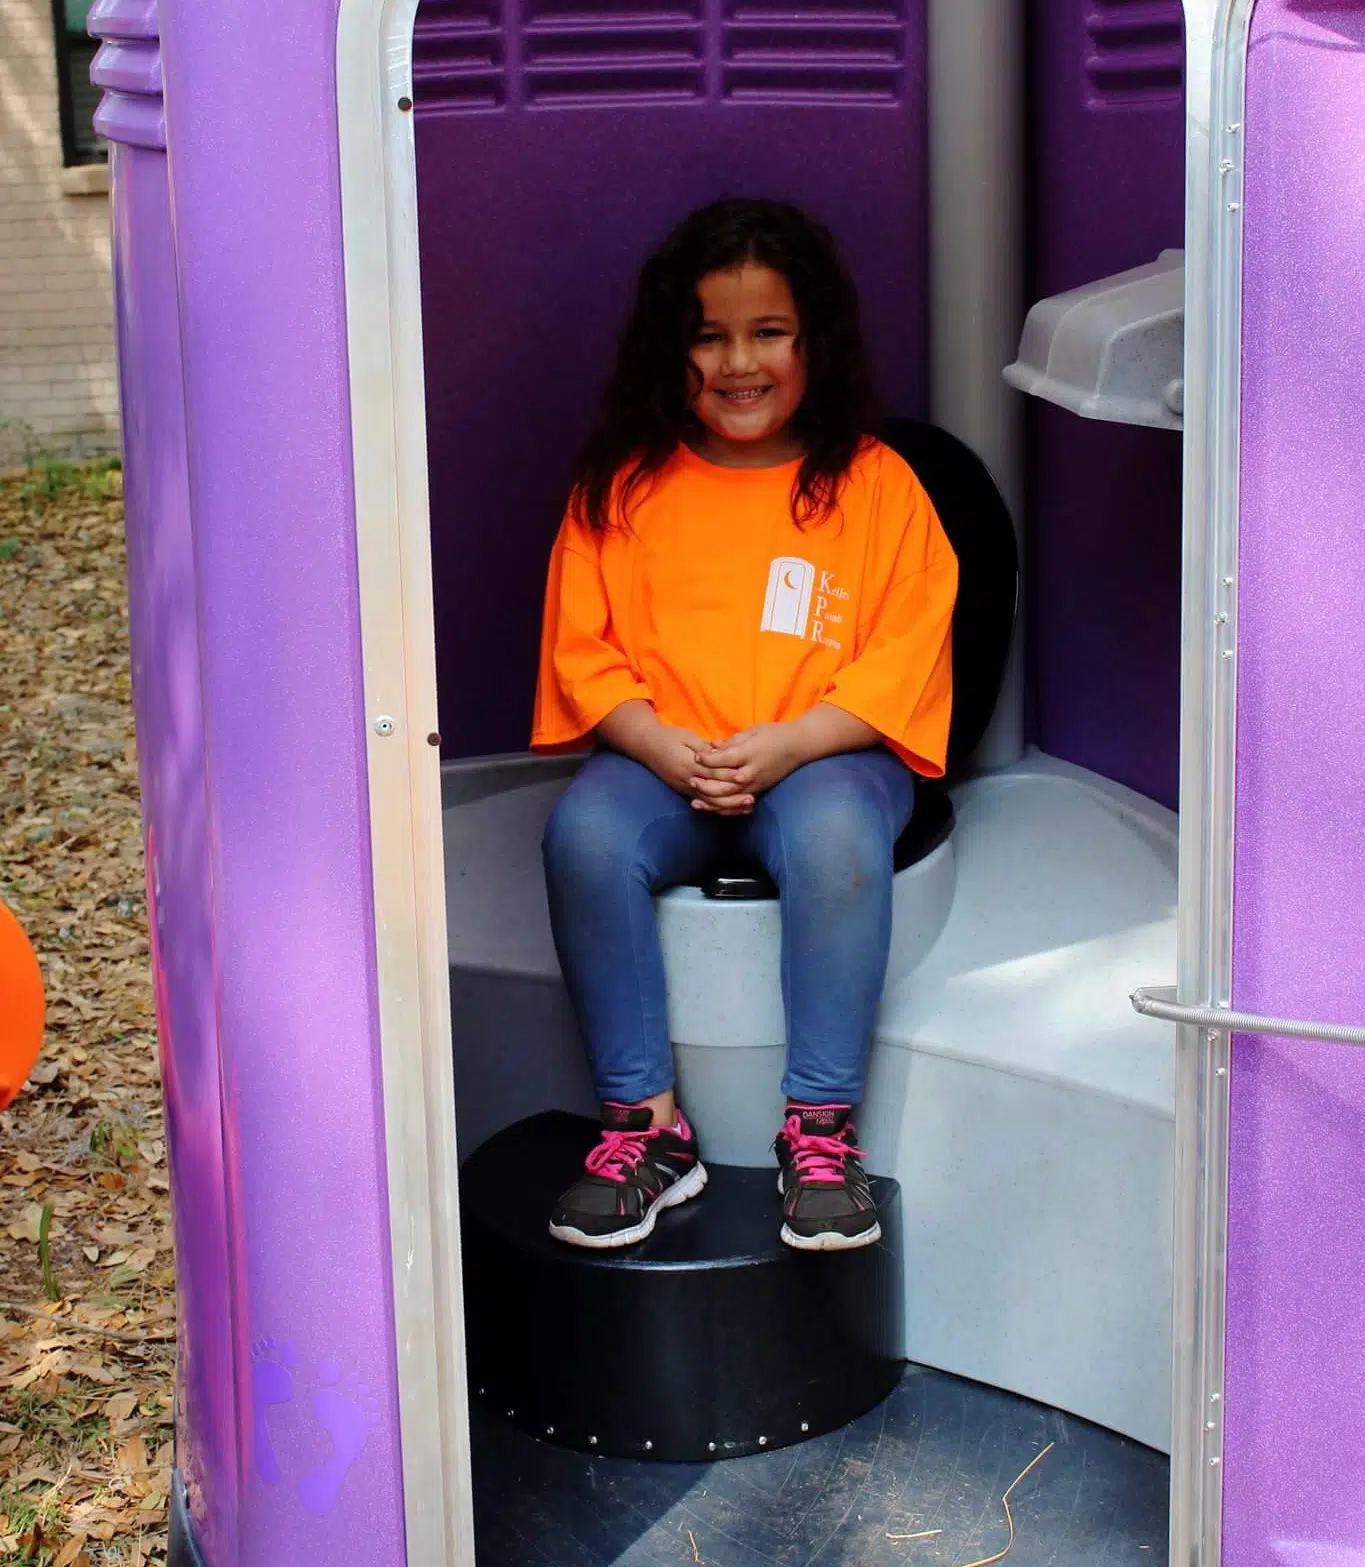 a young girl sitting in a purple and white structure.